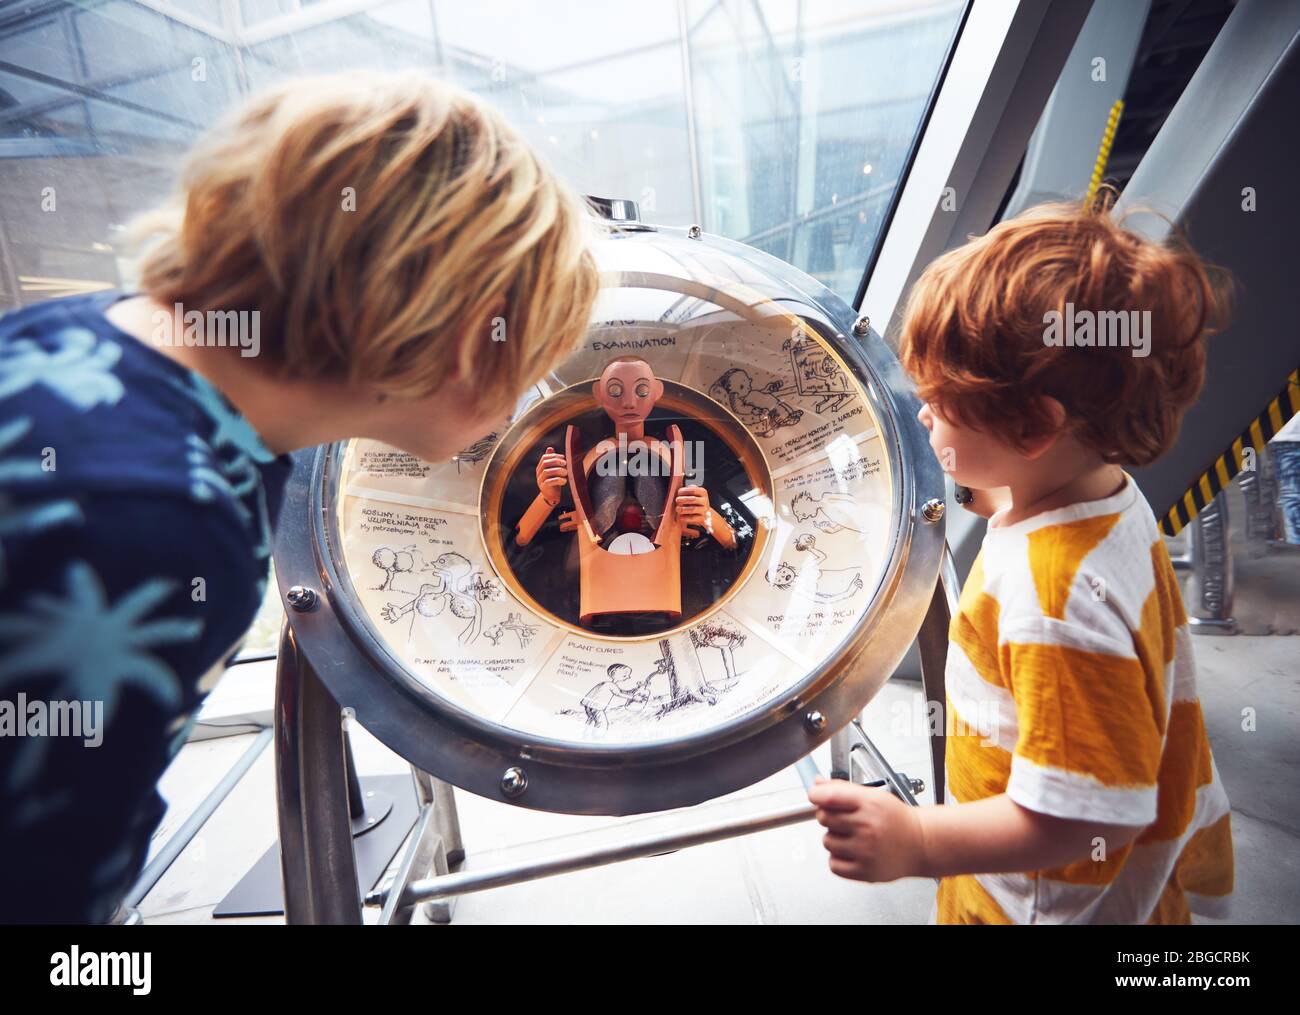 WARSAW, POLAND - June 20, 2019: Kids are testing the internal human body organs globe model in the Copernicus Science Centre in Warsaw, Poland Stock Photo